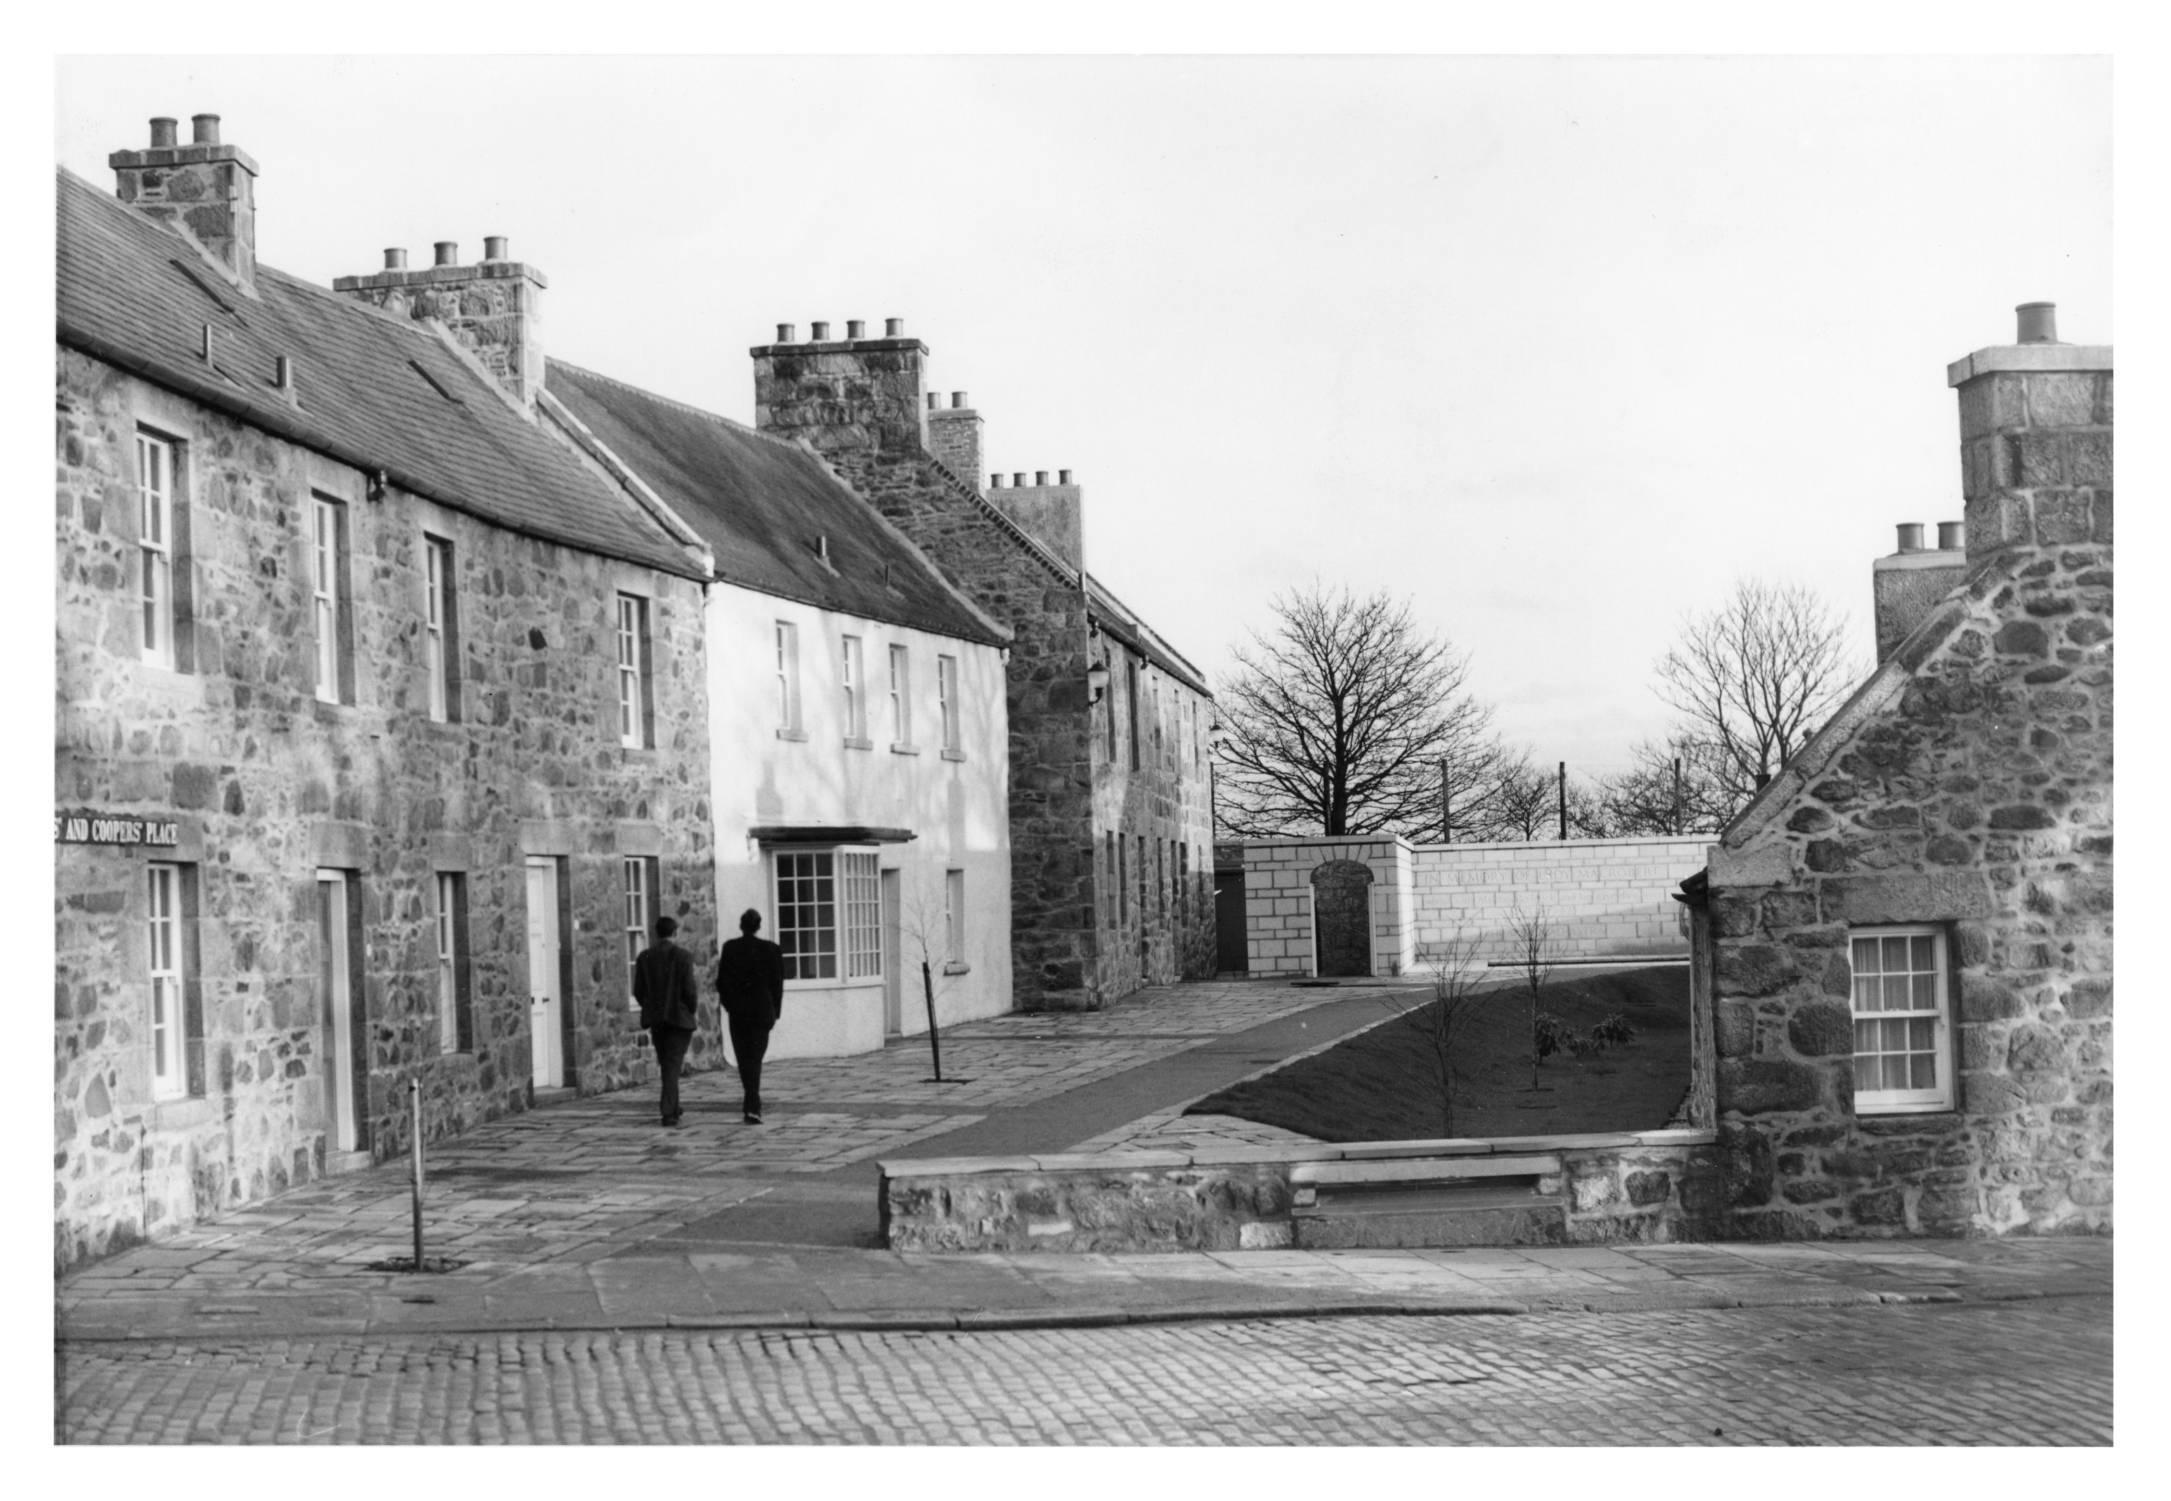 1967: A still, January day in Old Aberdeen's Wright#s and Copper's Place